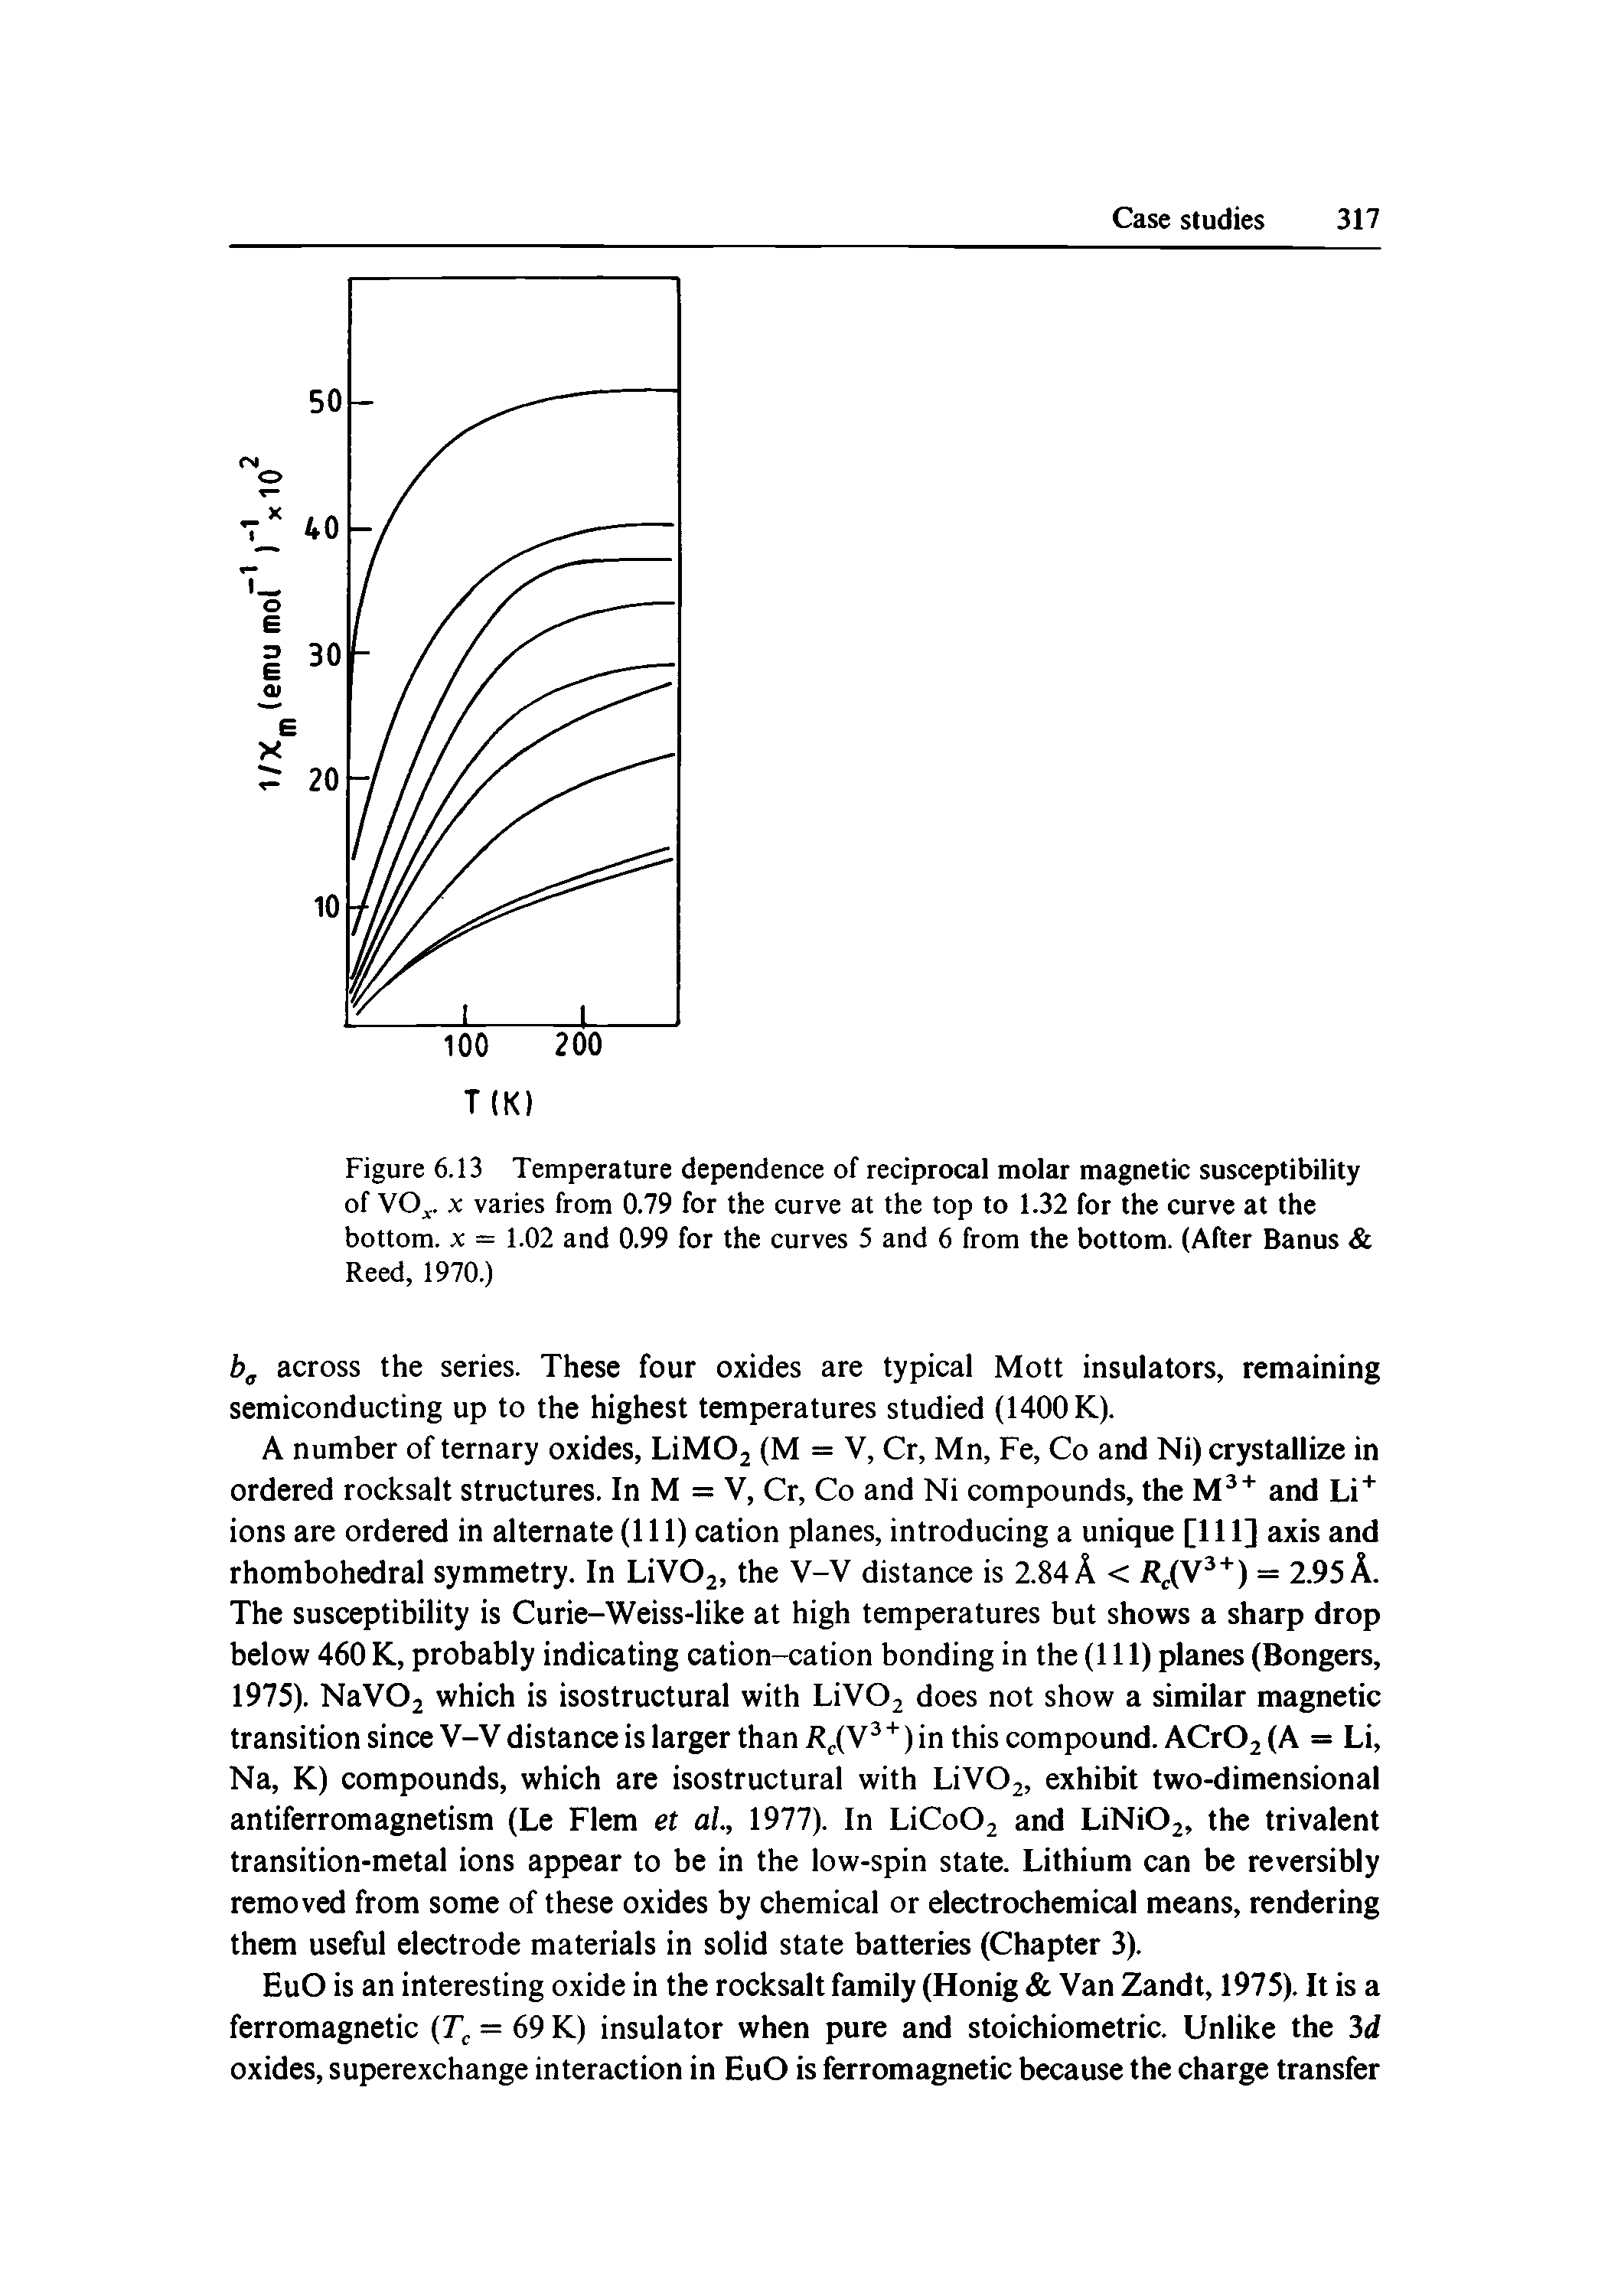 Figure 6.13 Temperature dependence of reciprocal molar magnetic susceptibility of VO. X varies from 0.79 for the curve at the top to 1.32 for the curve at the bottom. X = 1.02 and 0.99 for the curves 5 and 6 from the bottom. (After Banus Reed, 1970.)...